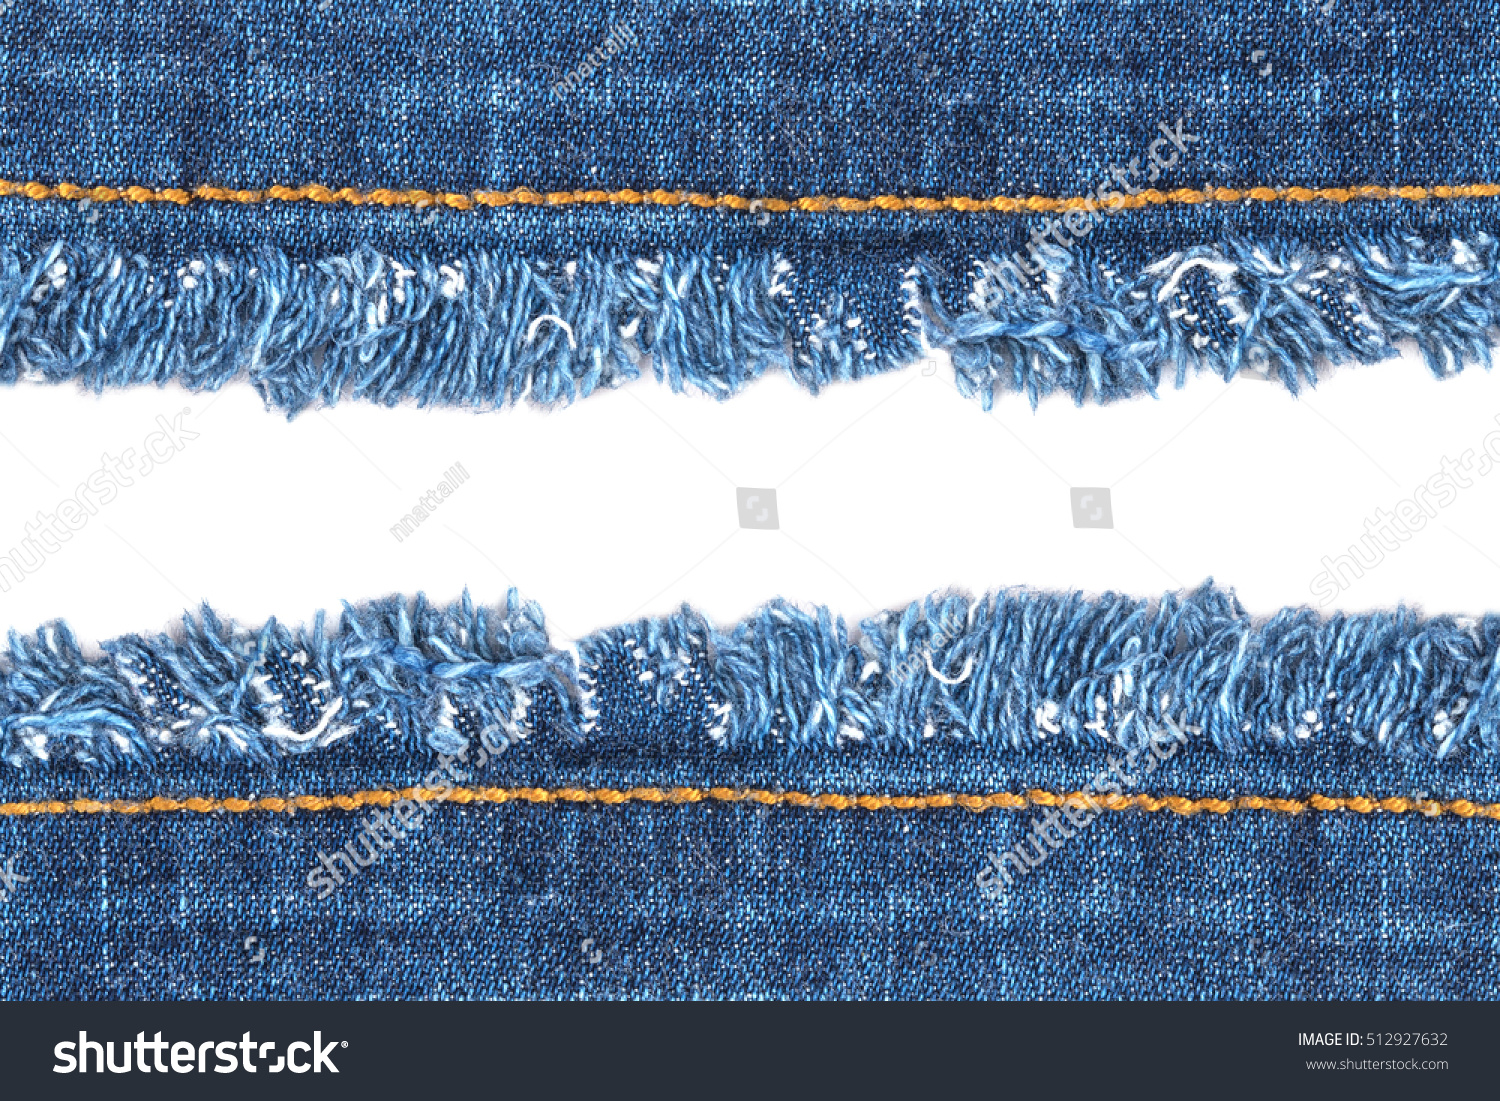 Denim Jeans Ripped Destroyed Torn Blue Stock Photo 512927632 - Shutterstock